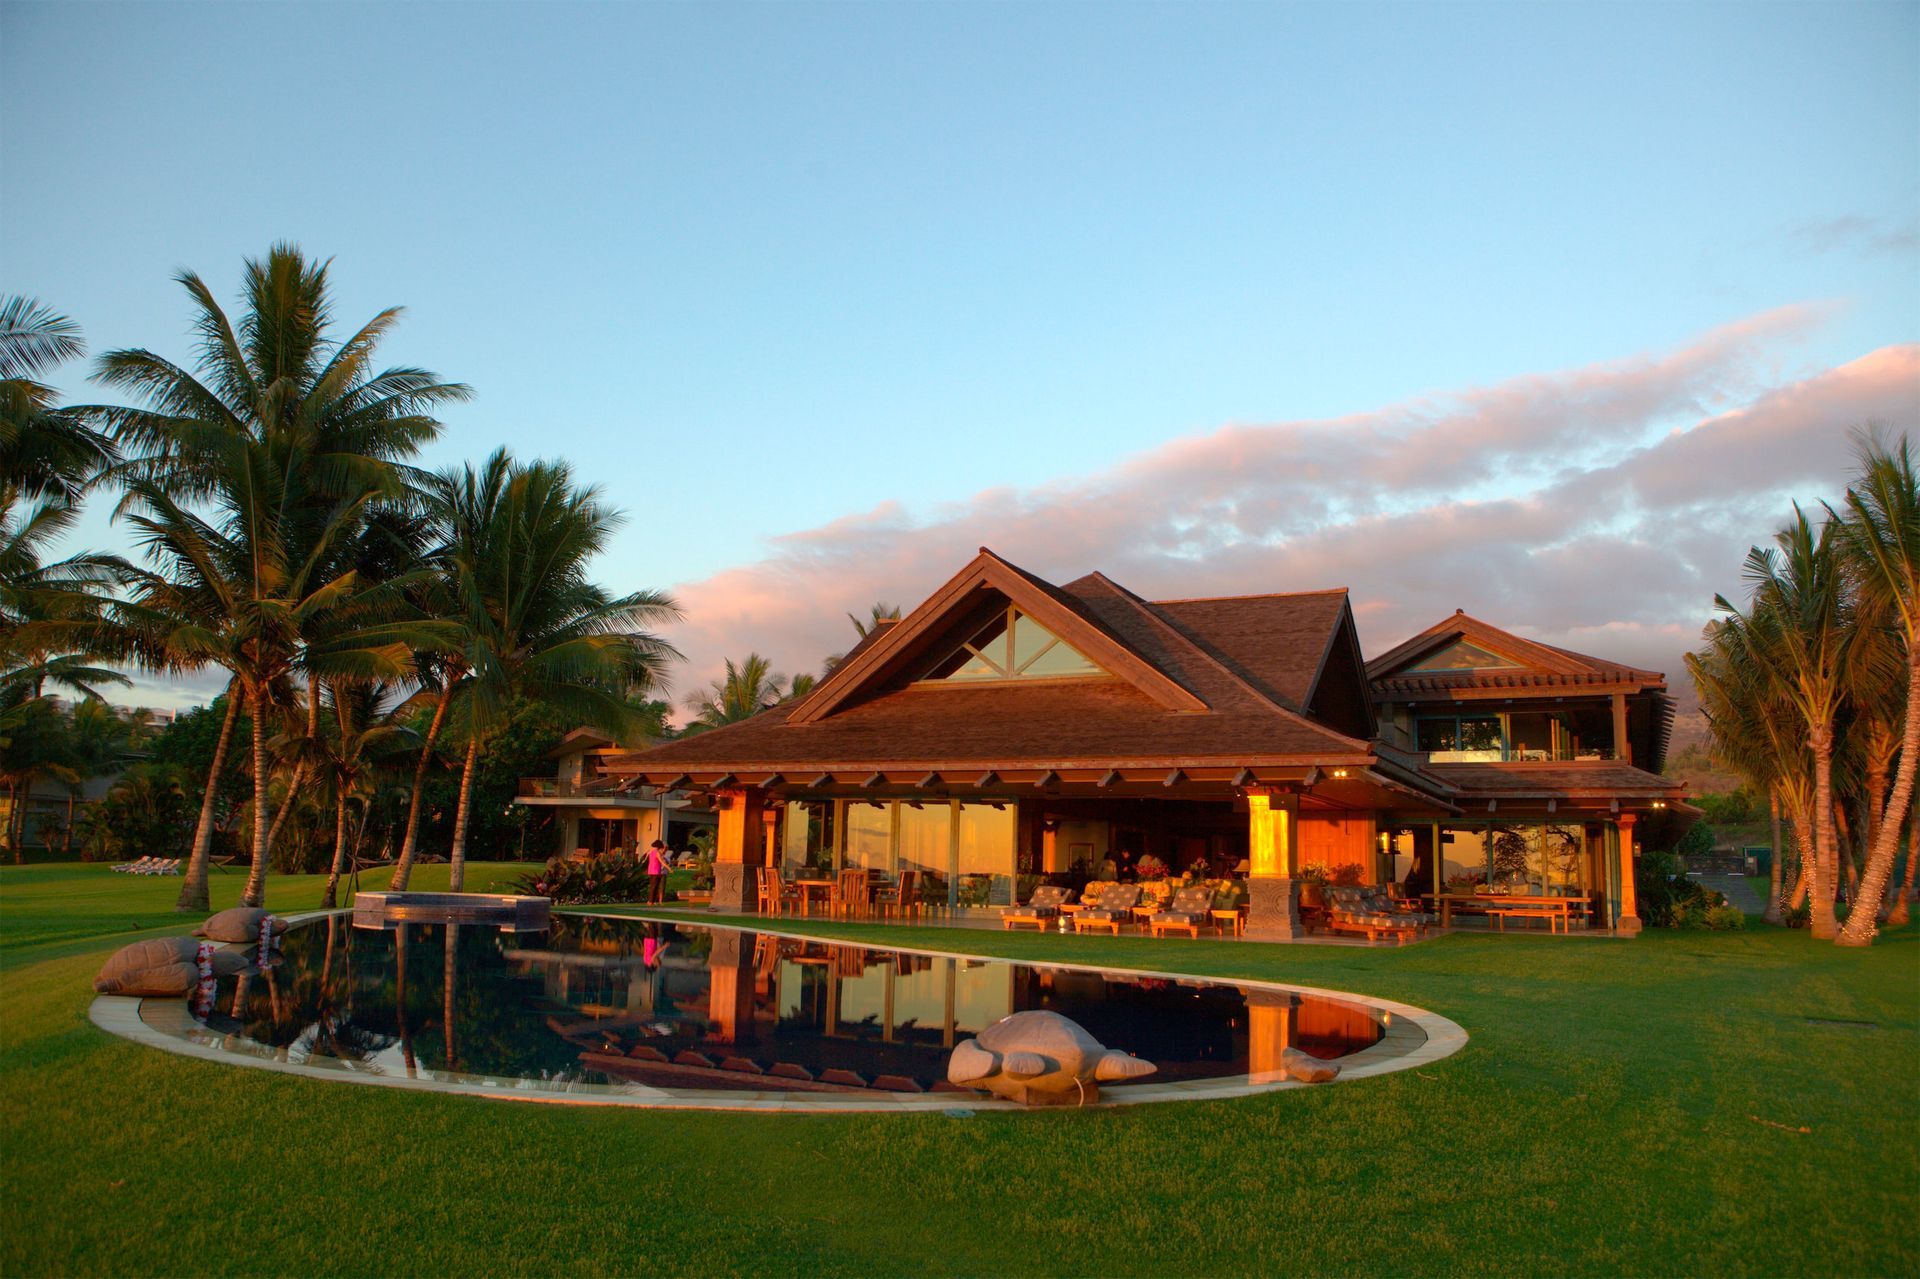 A view of the rear of the Makena Waterfront Estate in Maui, HI, at dusk, with the swimming pool in the foreground.